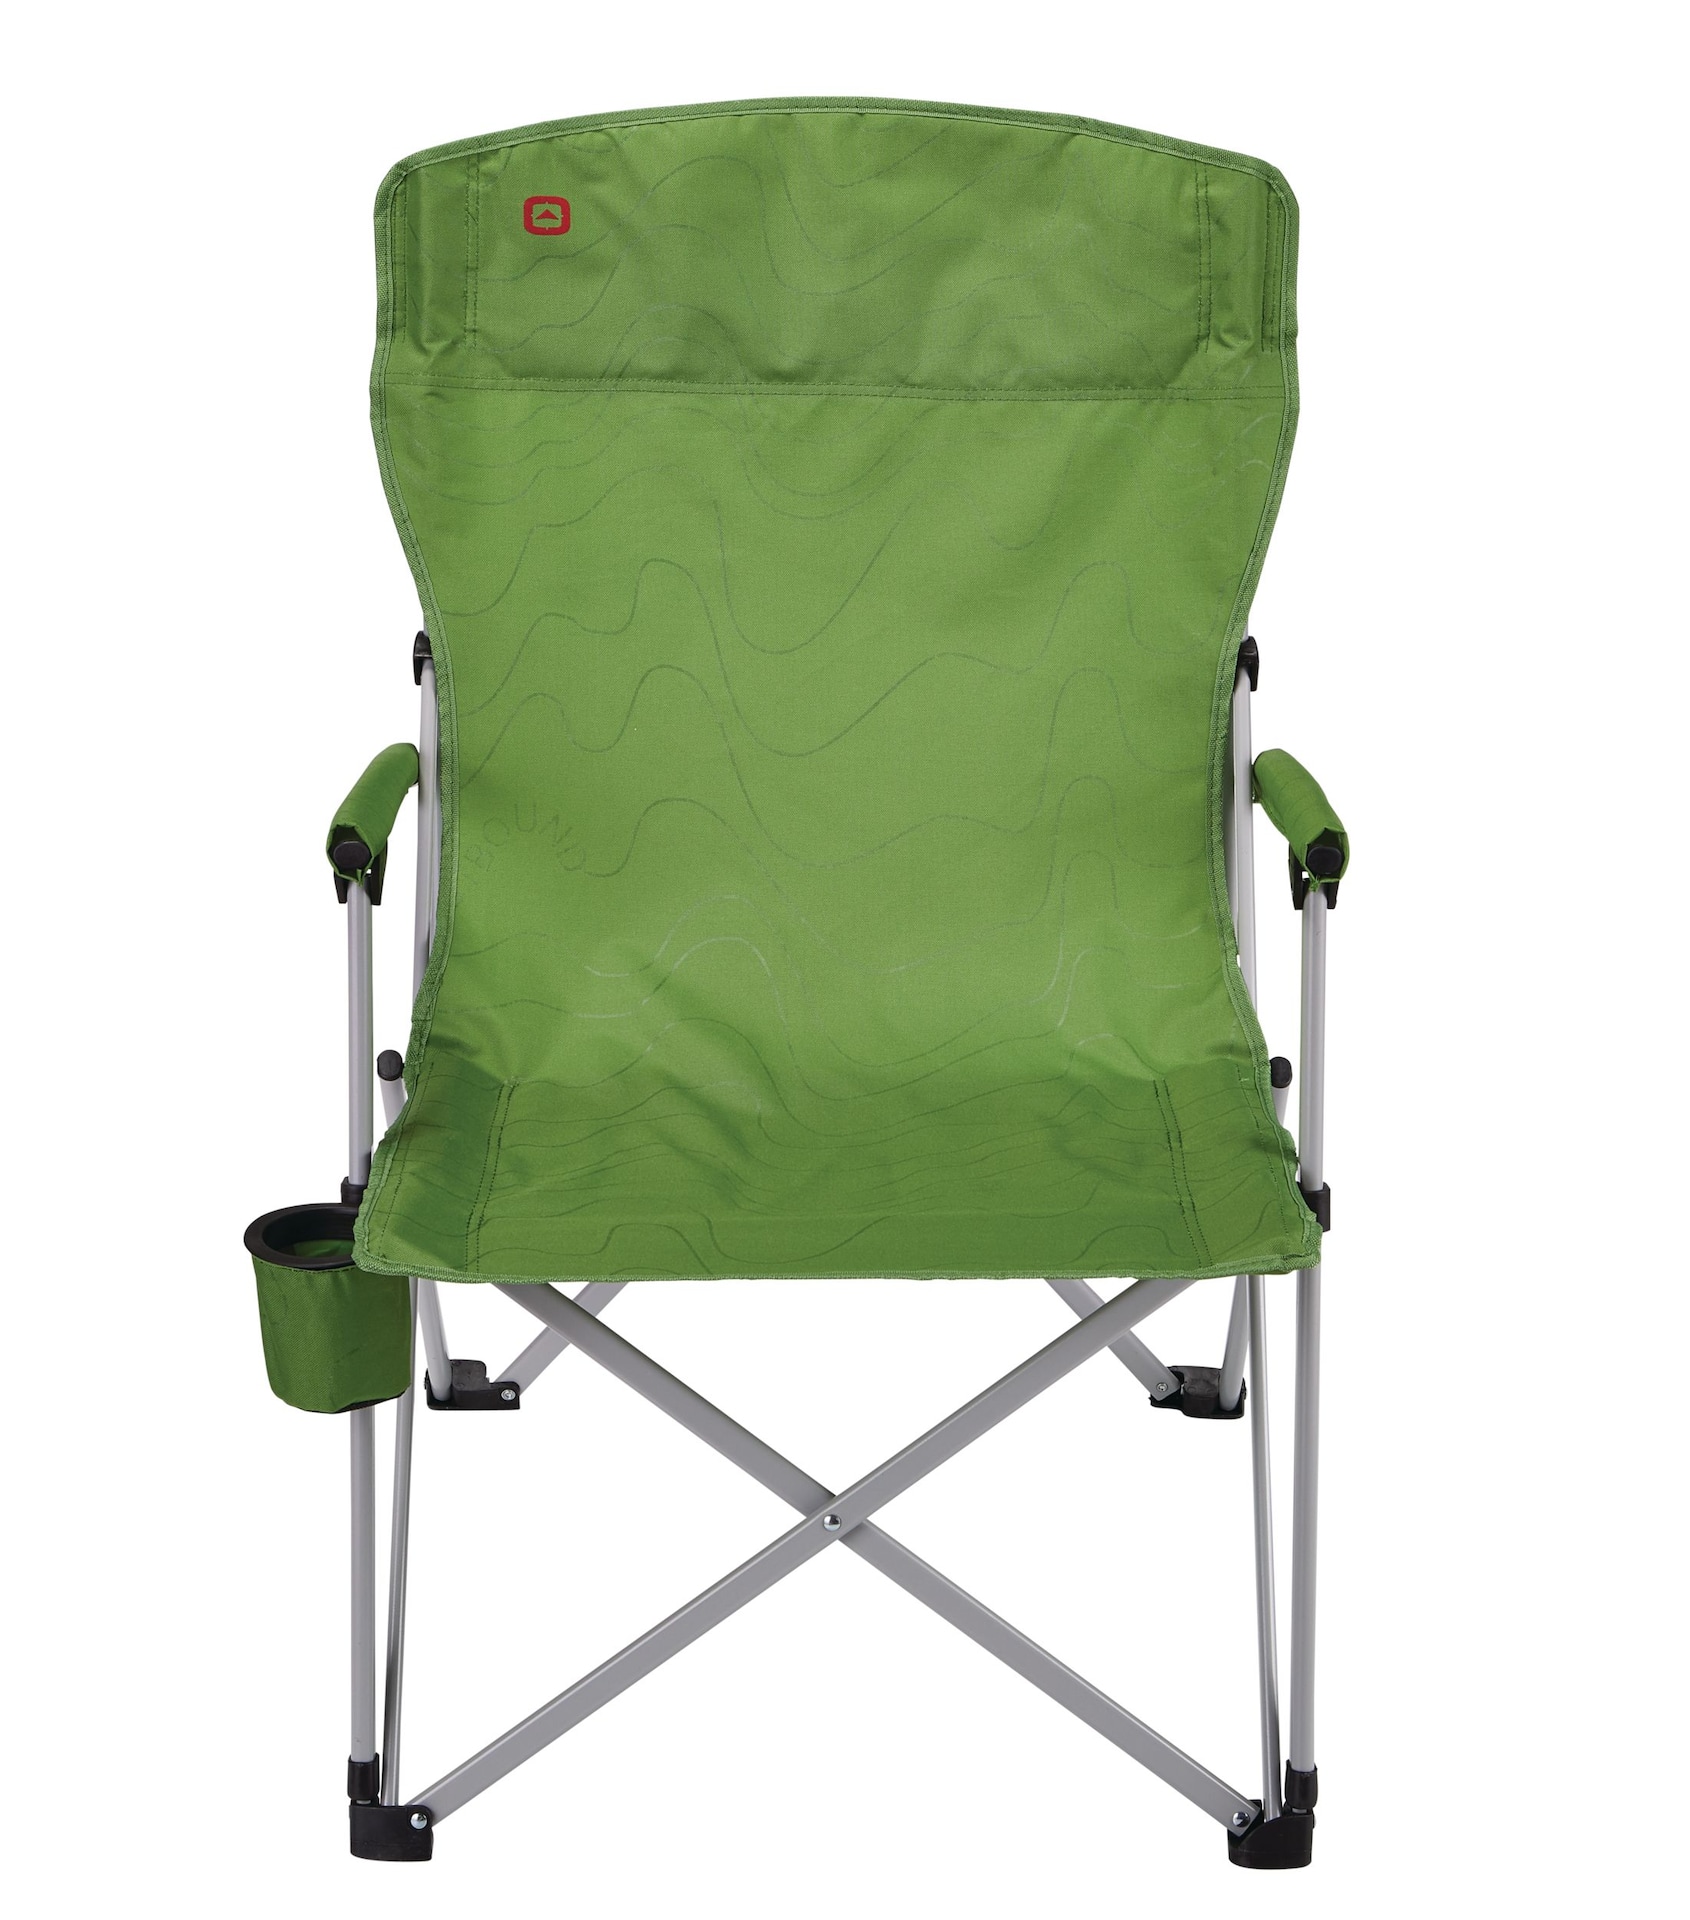 Outbound Lightweight Folding Camping Quad Chair w/ Solid Armrests